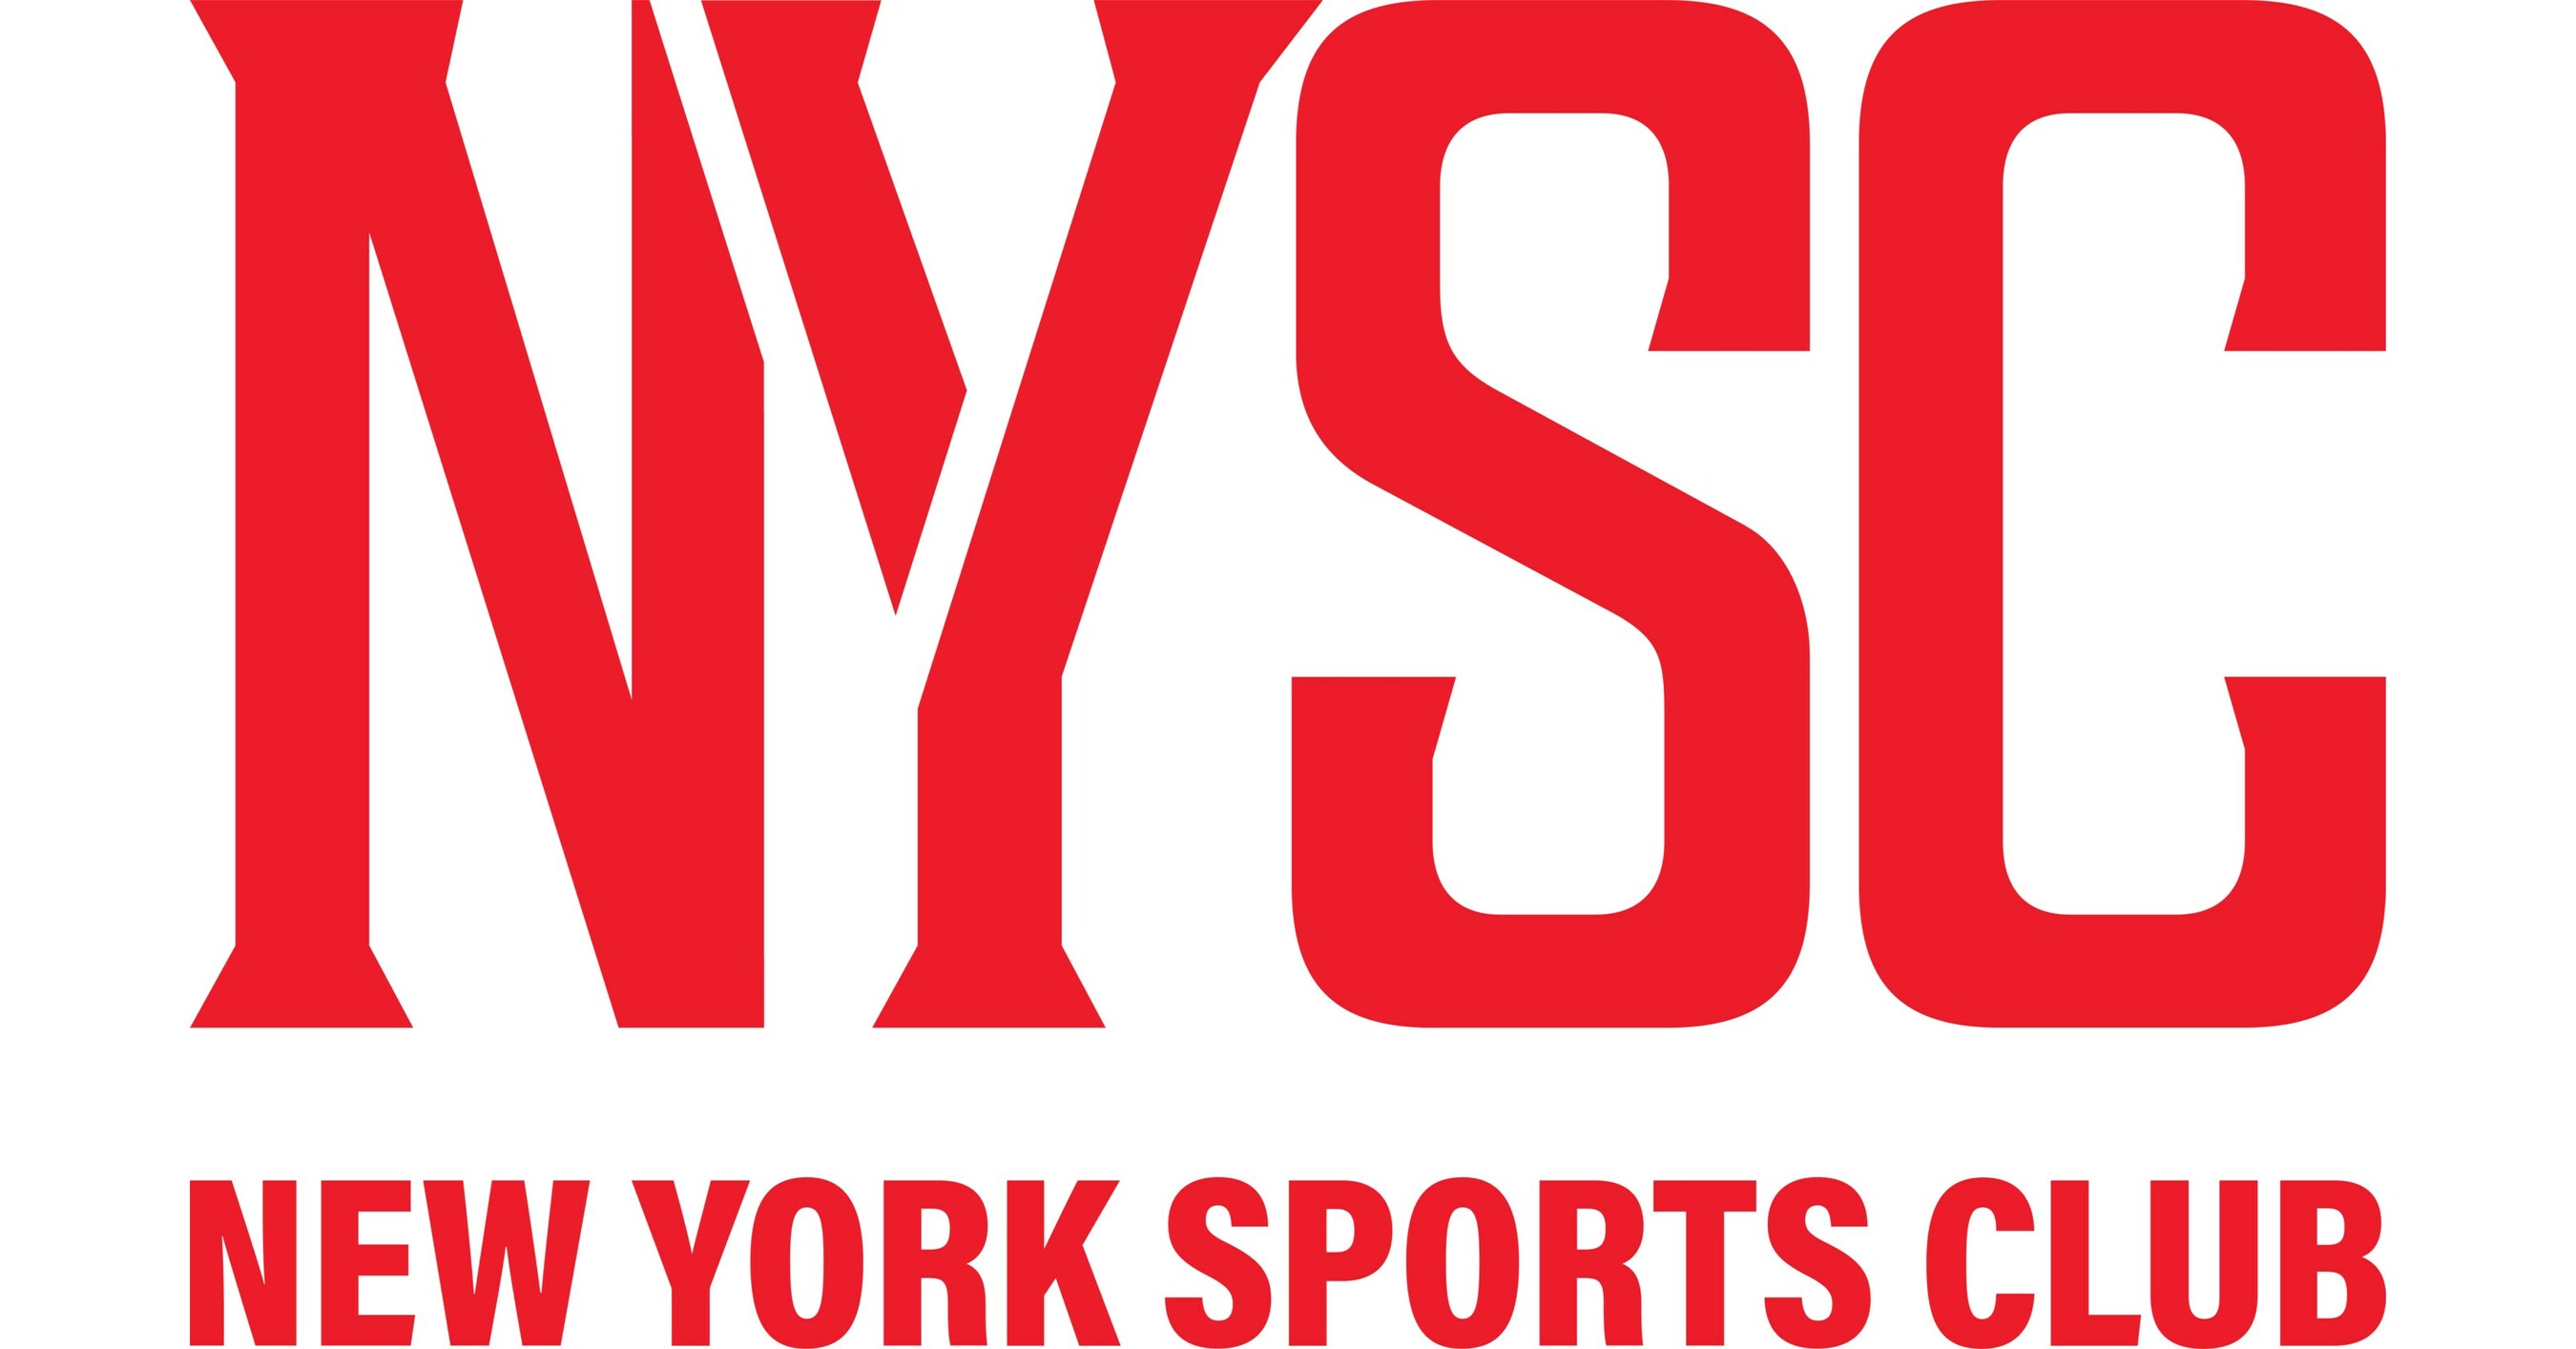 New York Sports Club (NYSC) Announces Opening of Its First New York Branded Sports  Club in Washington, D.C.